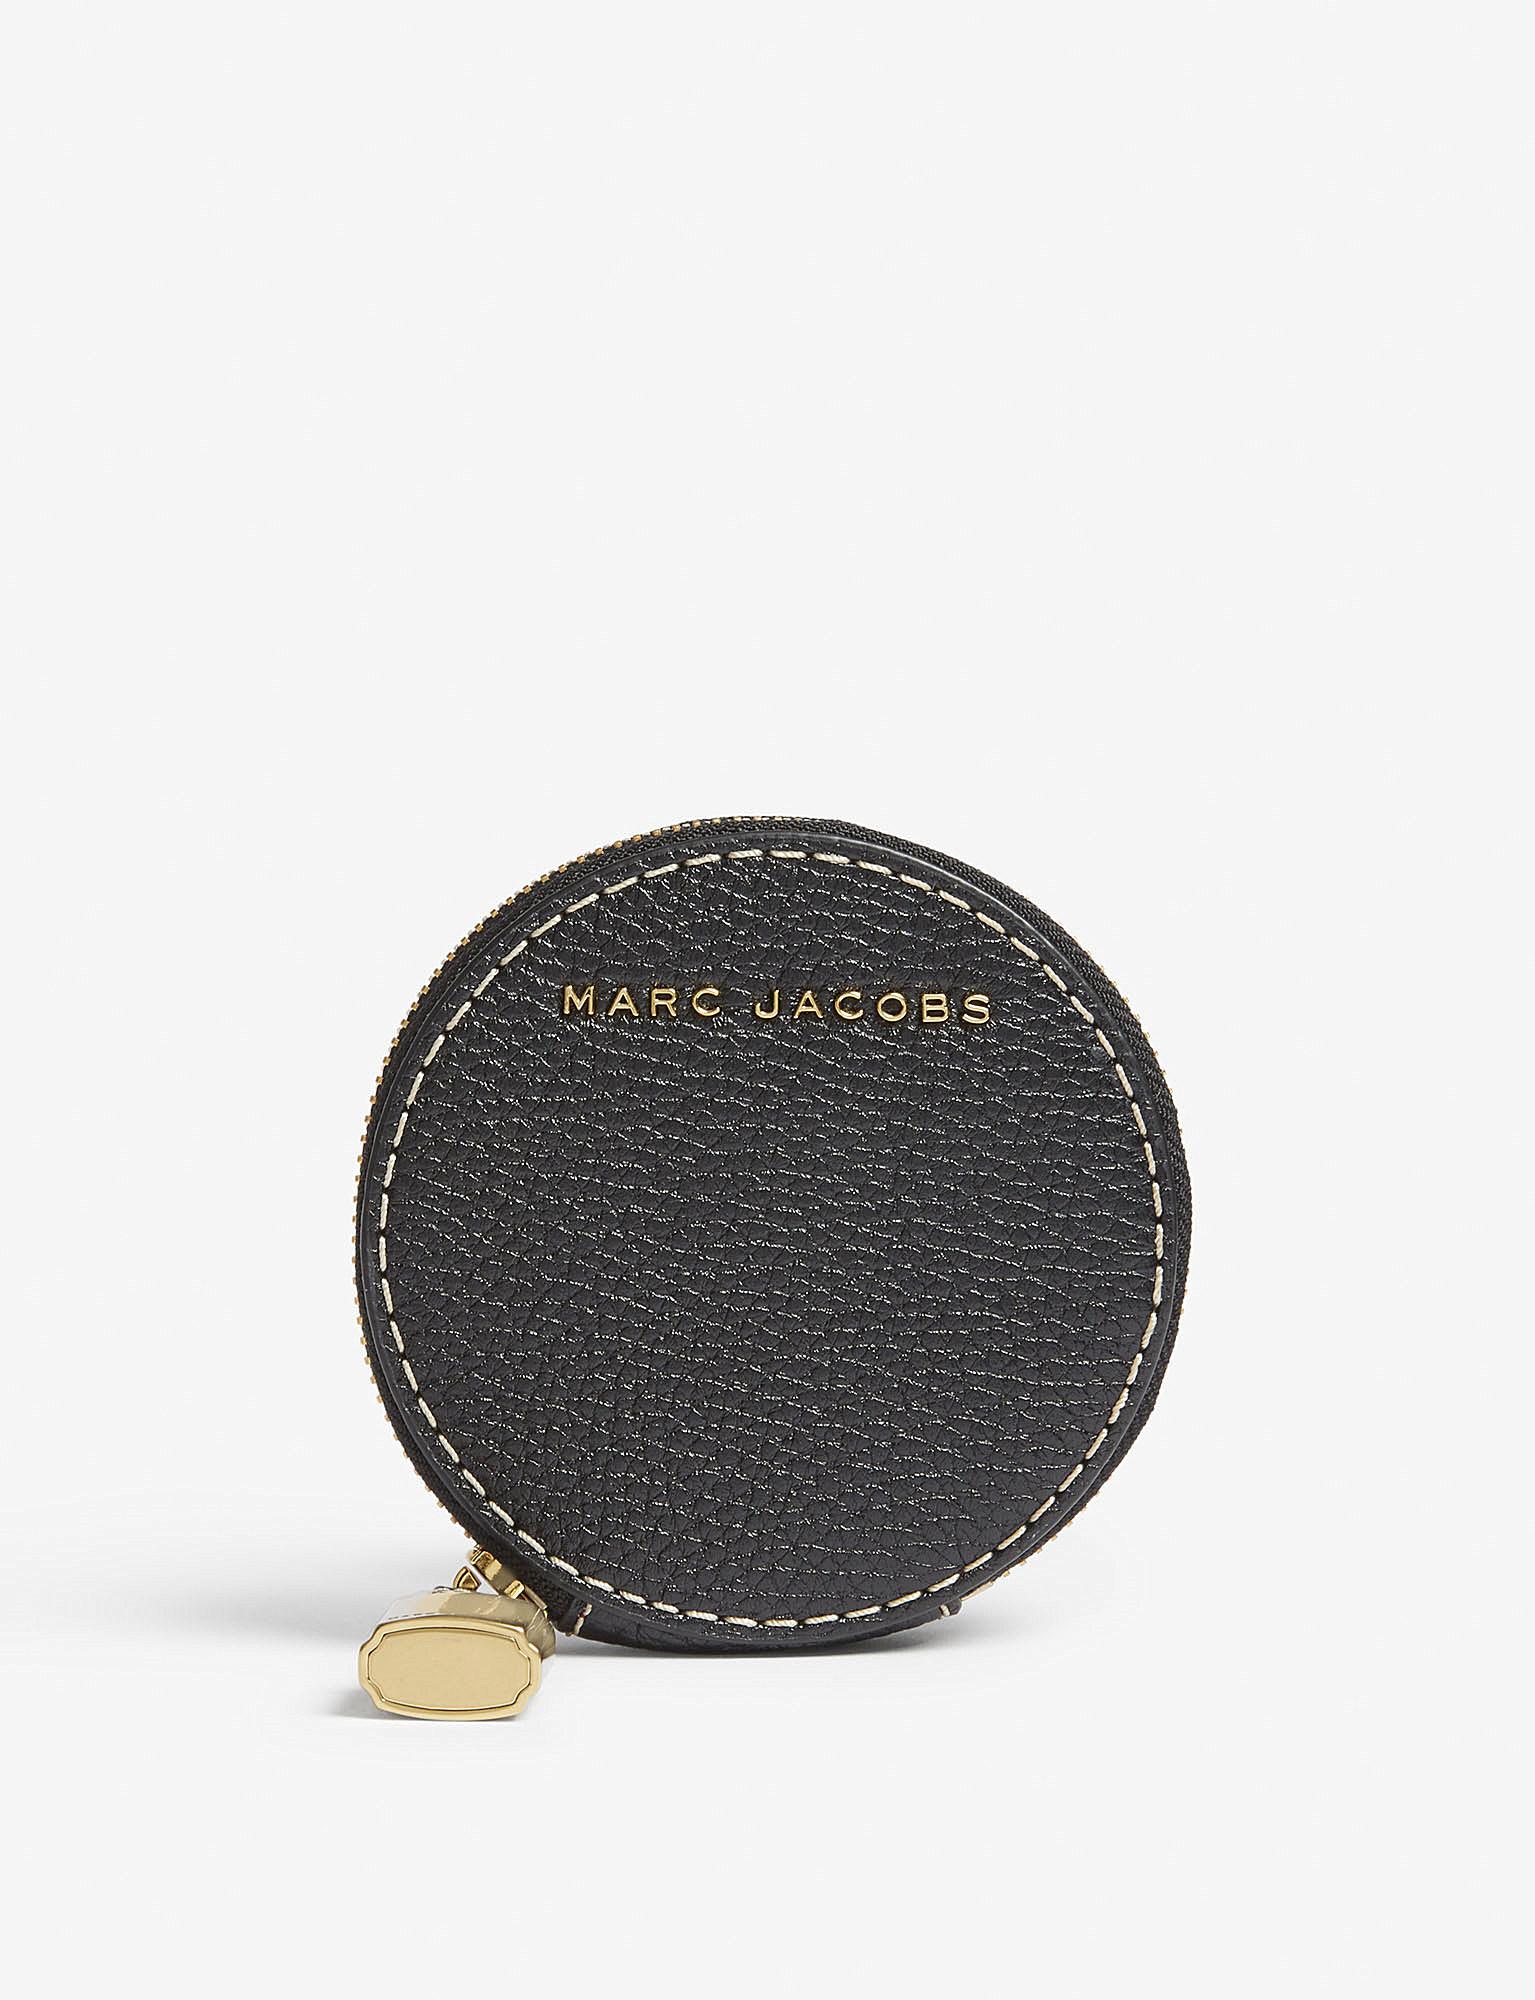 Marc Jacobs Round Grained Leather Coin Purse in Black | Lyst